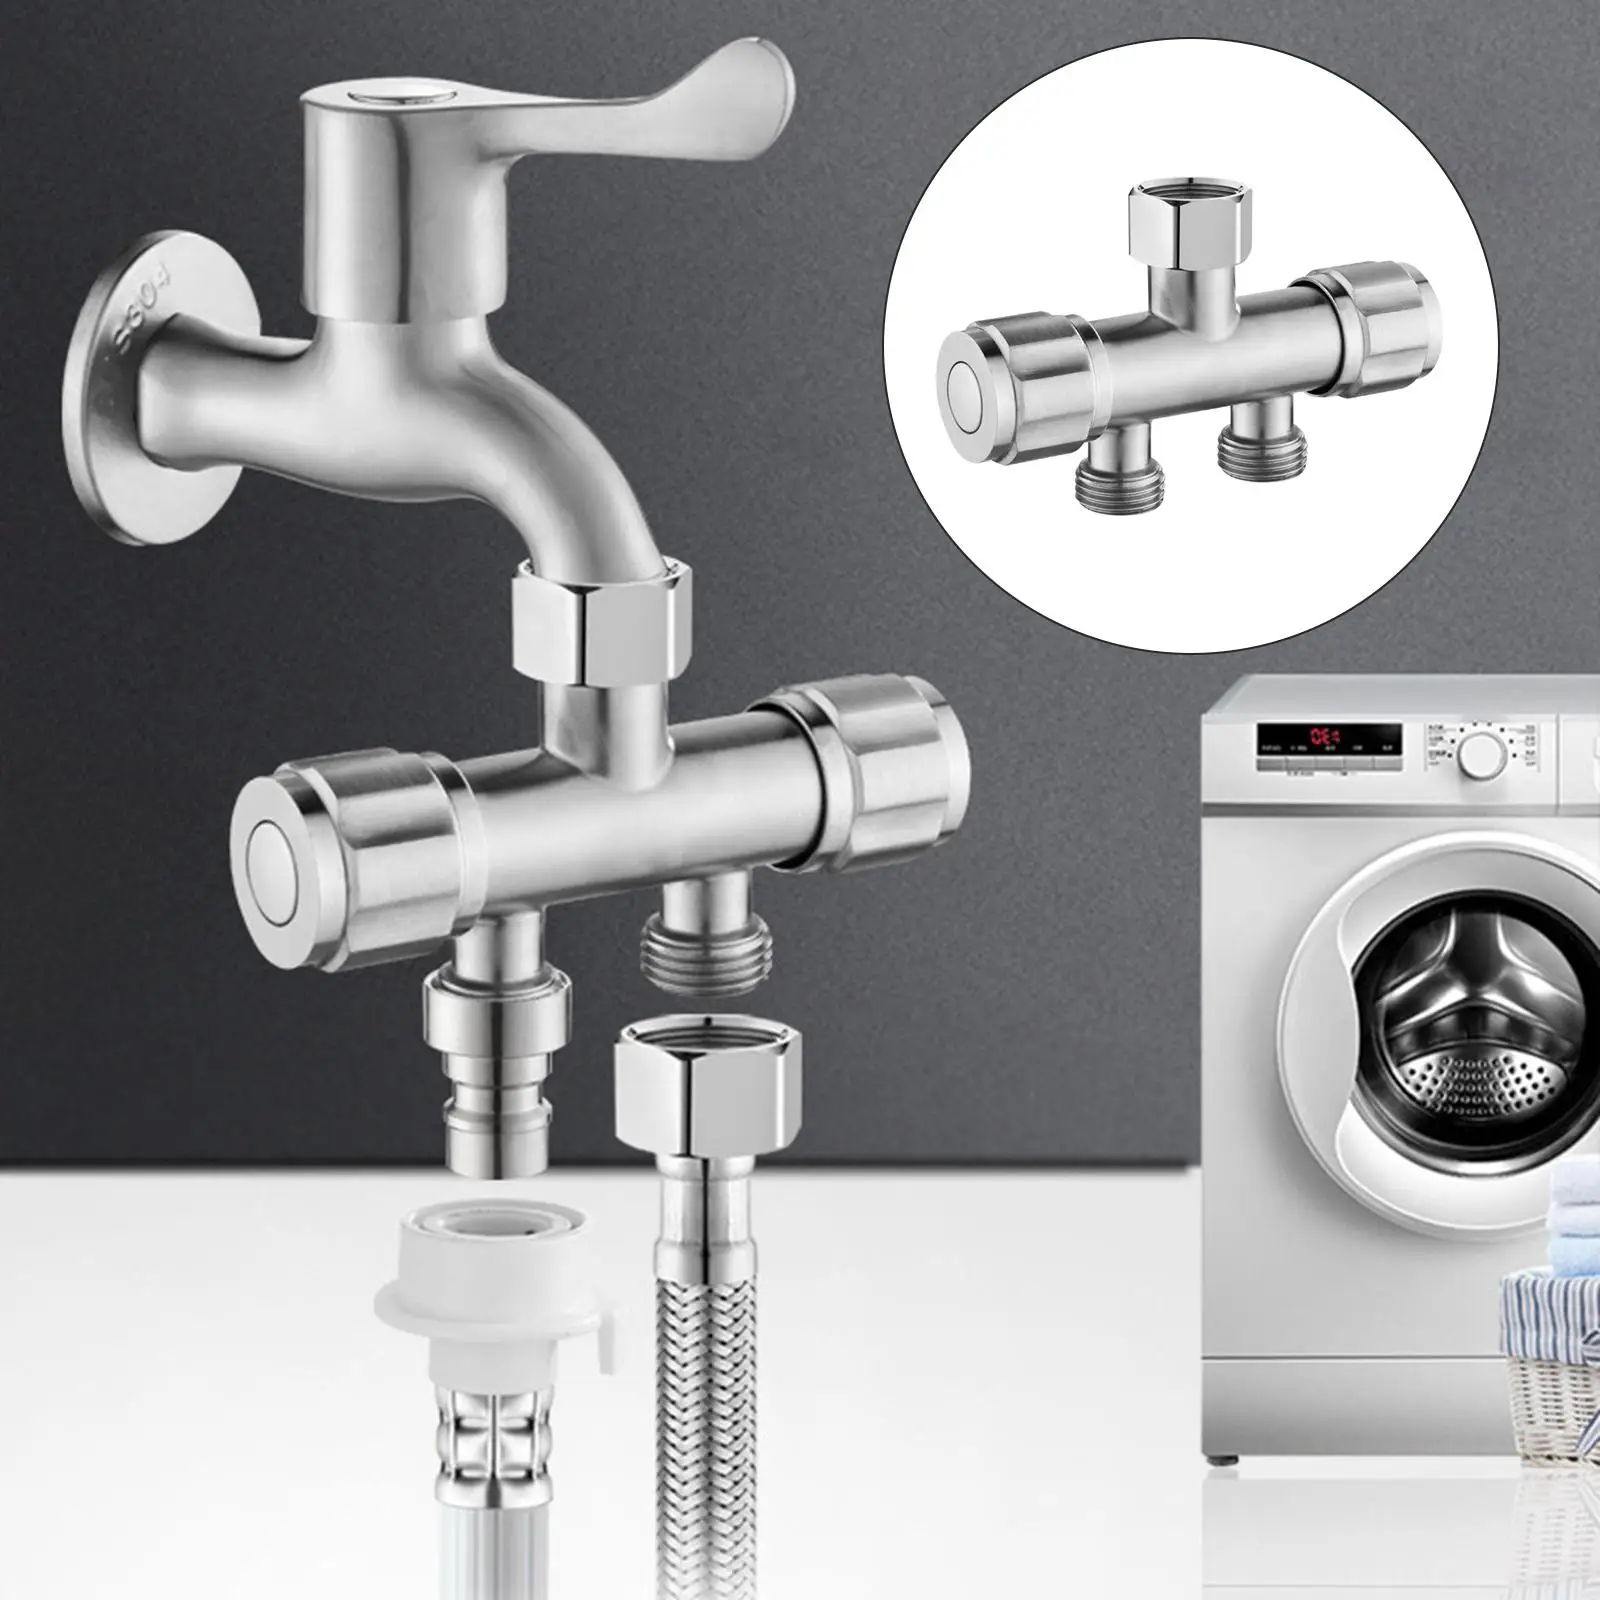 Bathroom Faucet Valve Single Inlet Double Outlet Double Control Valve for Shower Head Toilet Sink Basin Water Heater